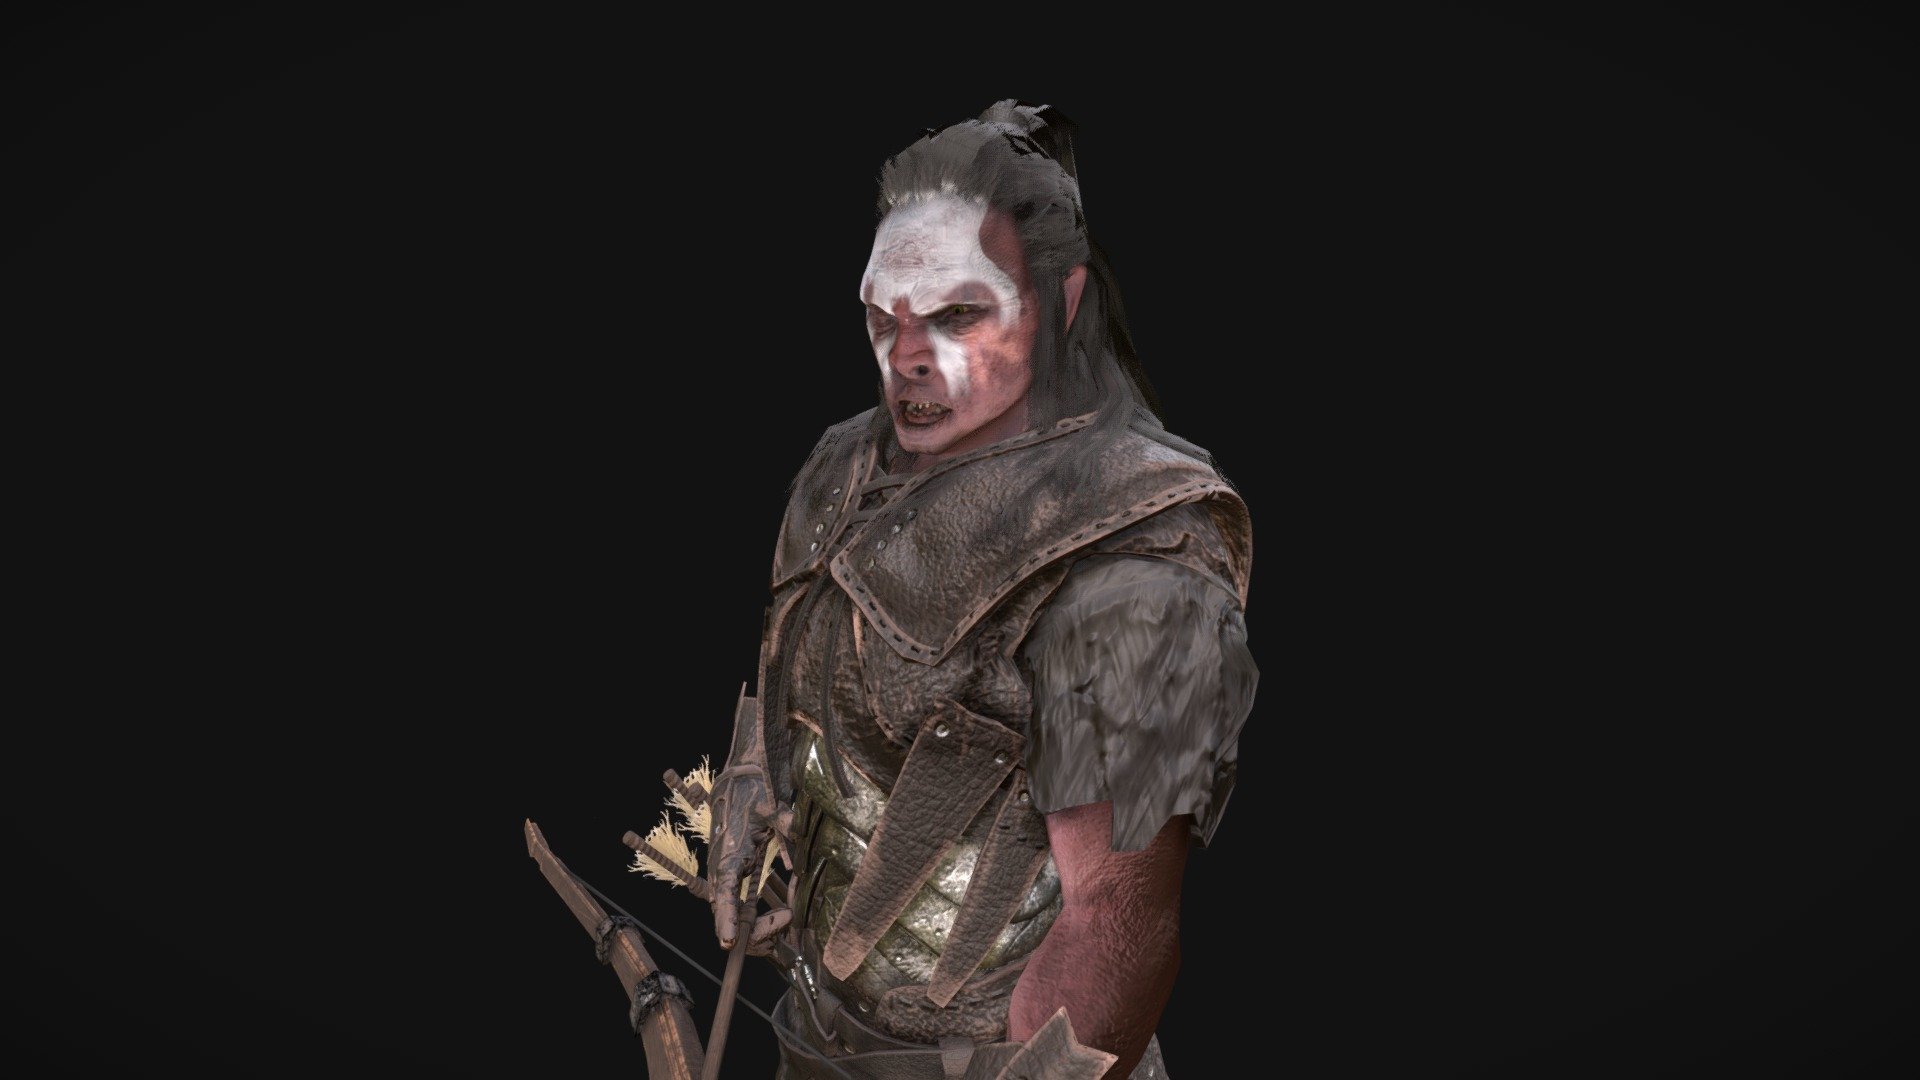 Gameready character model of the famous Uruk-Hai Lurtz from the Fellowship of the ring.
Highpoly made in Zbrush. Lowpoly mesh made in 3dcoat and 3dsMax. Textured and baked in Substance painter 2 and some clean up in Photoshop.

First time I did a full game character pipeline. I had lots of fun working on it - Uruk Hai Lurtz - 3D model by Bram Delaey (@bram.delaey) 3d model